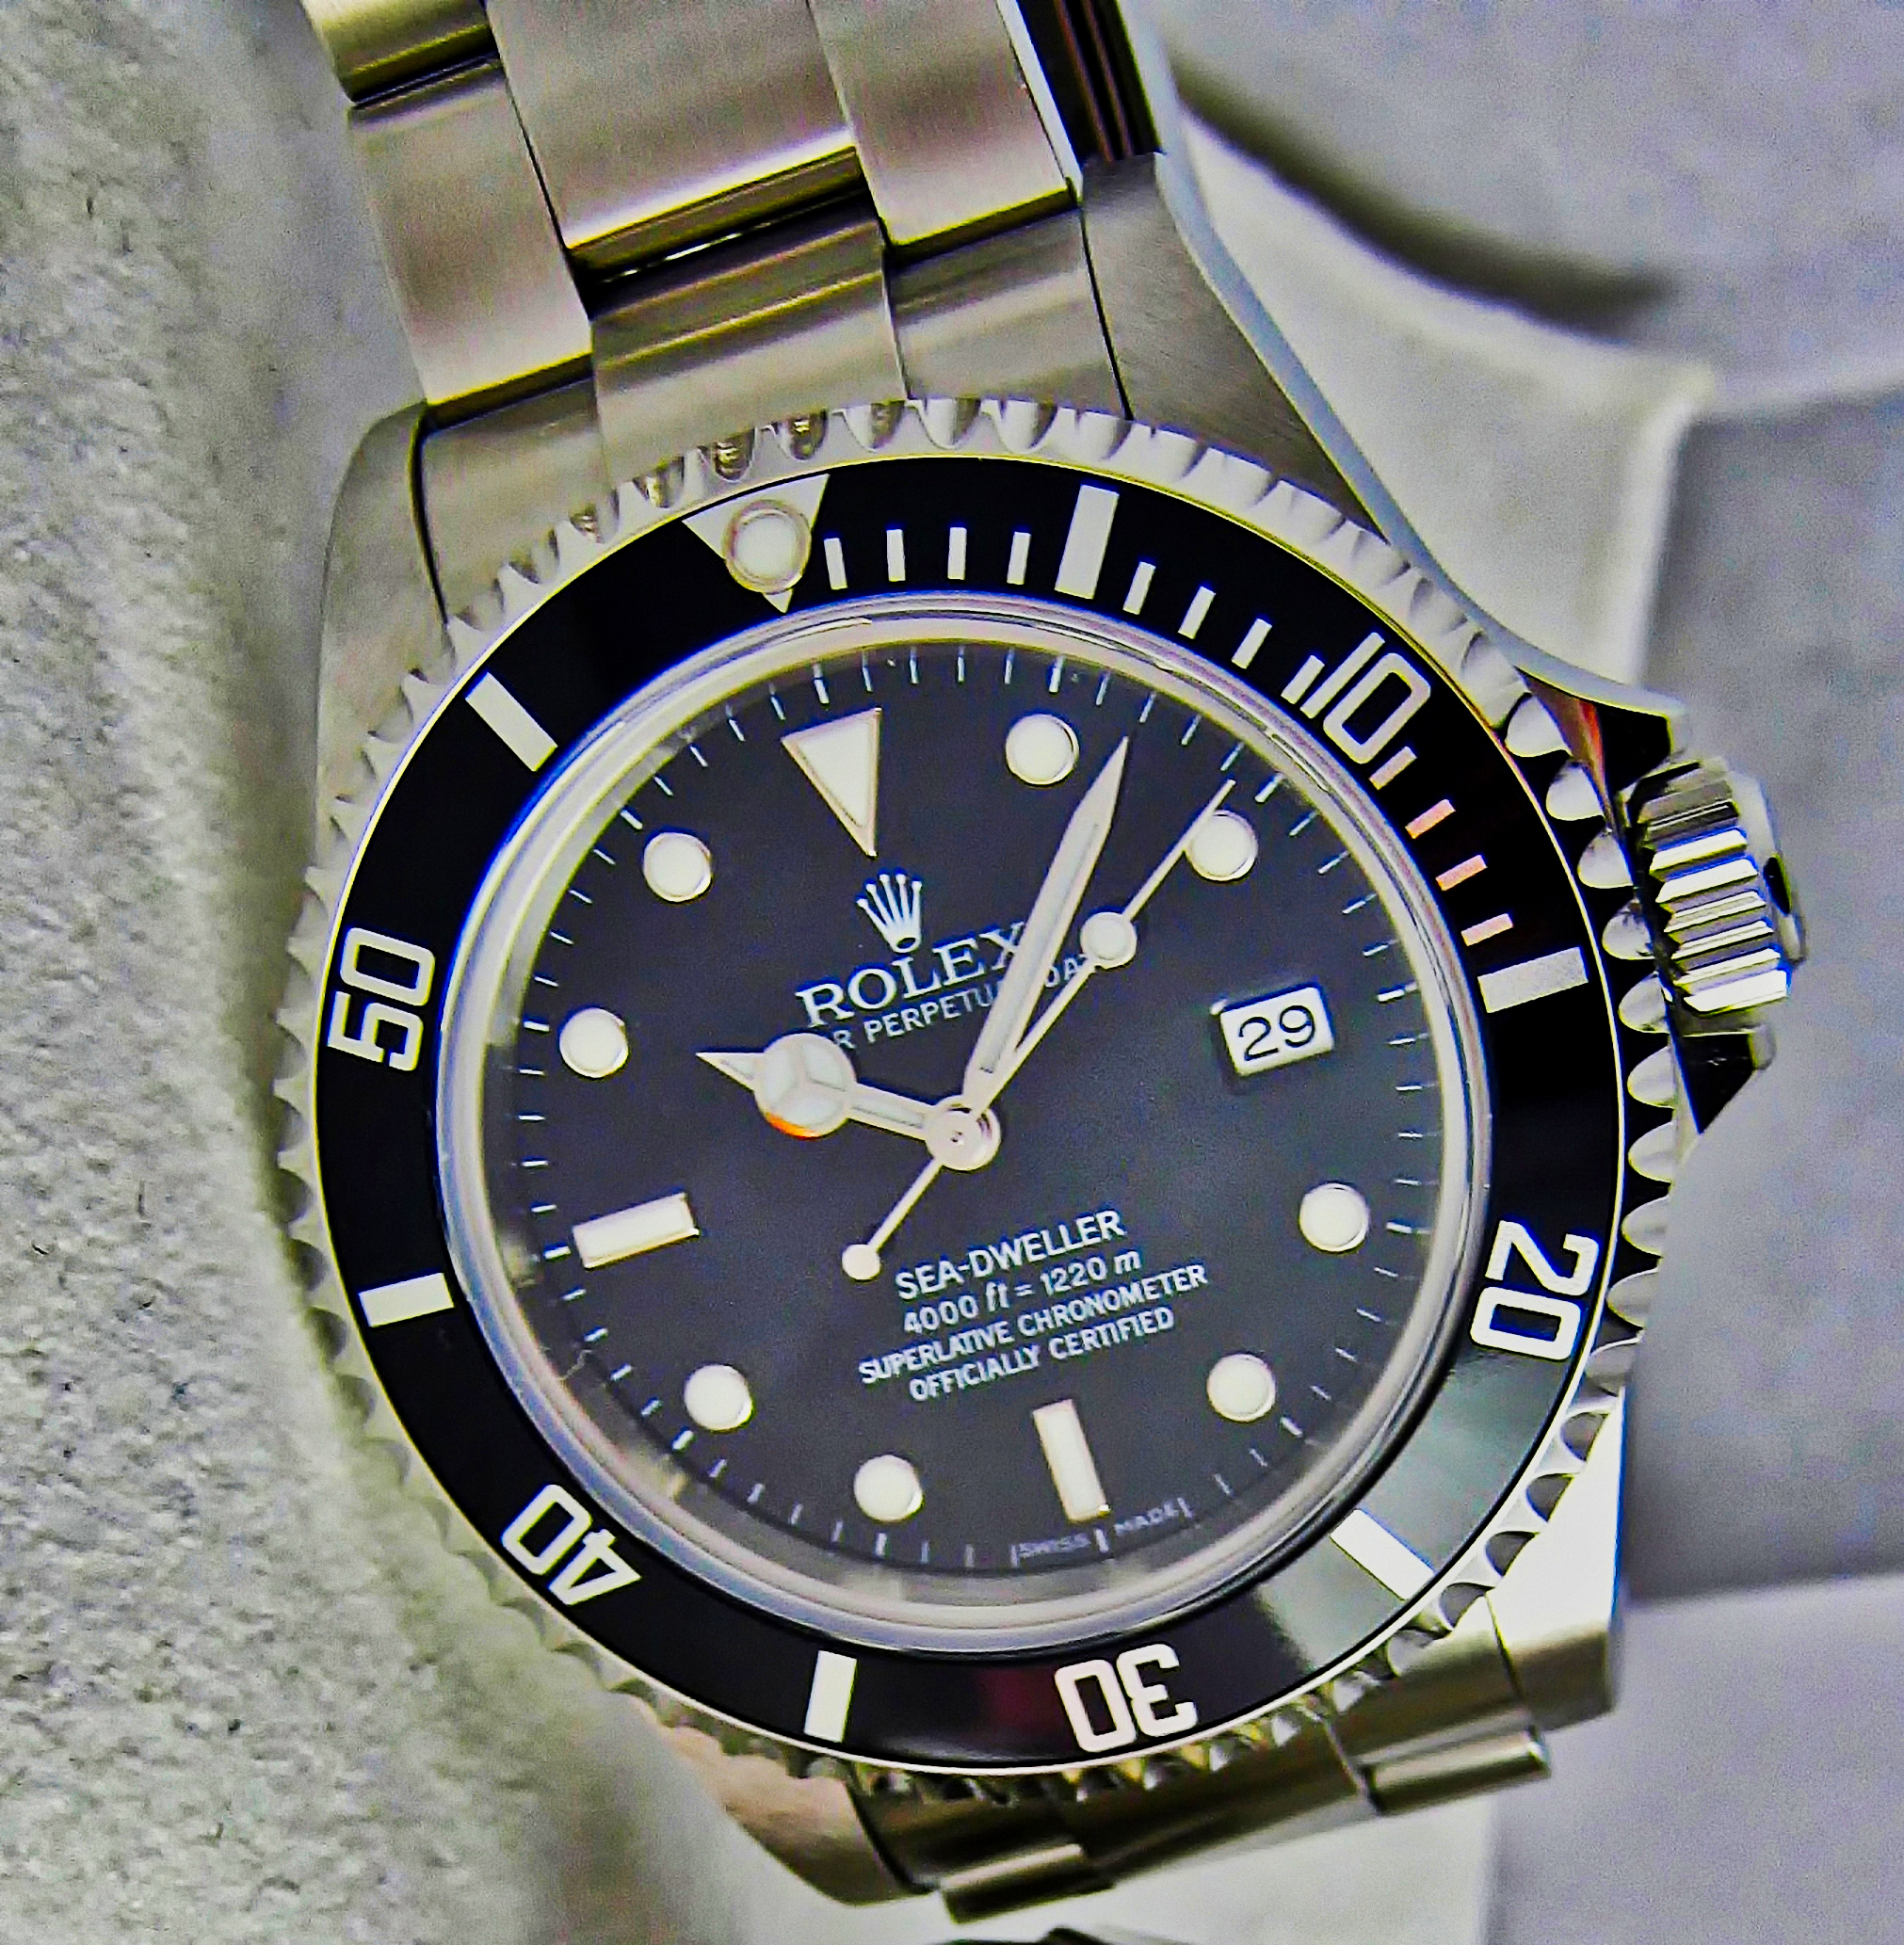 The Efficacy of Craftsmanship: Assessing Rolex's Superior Quality and Precision